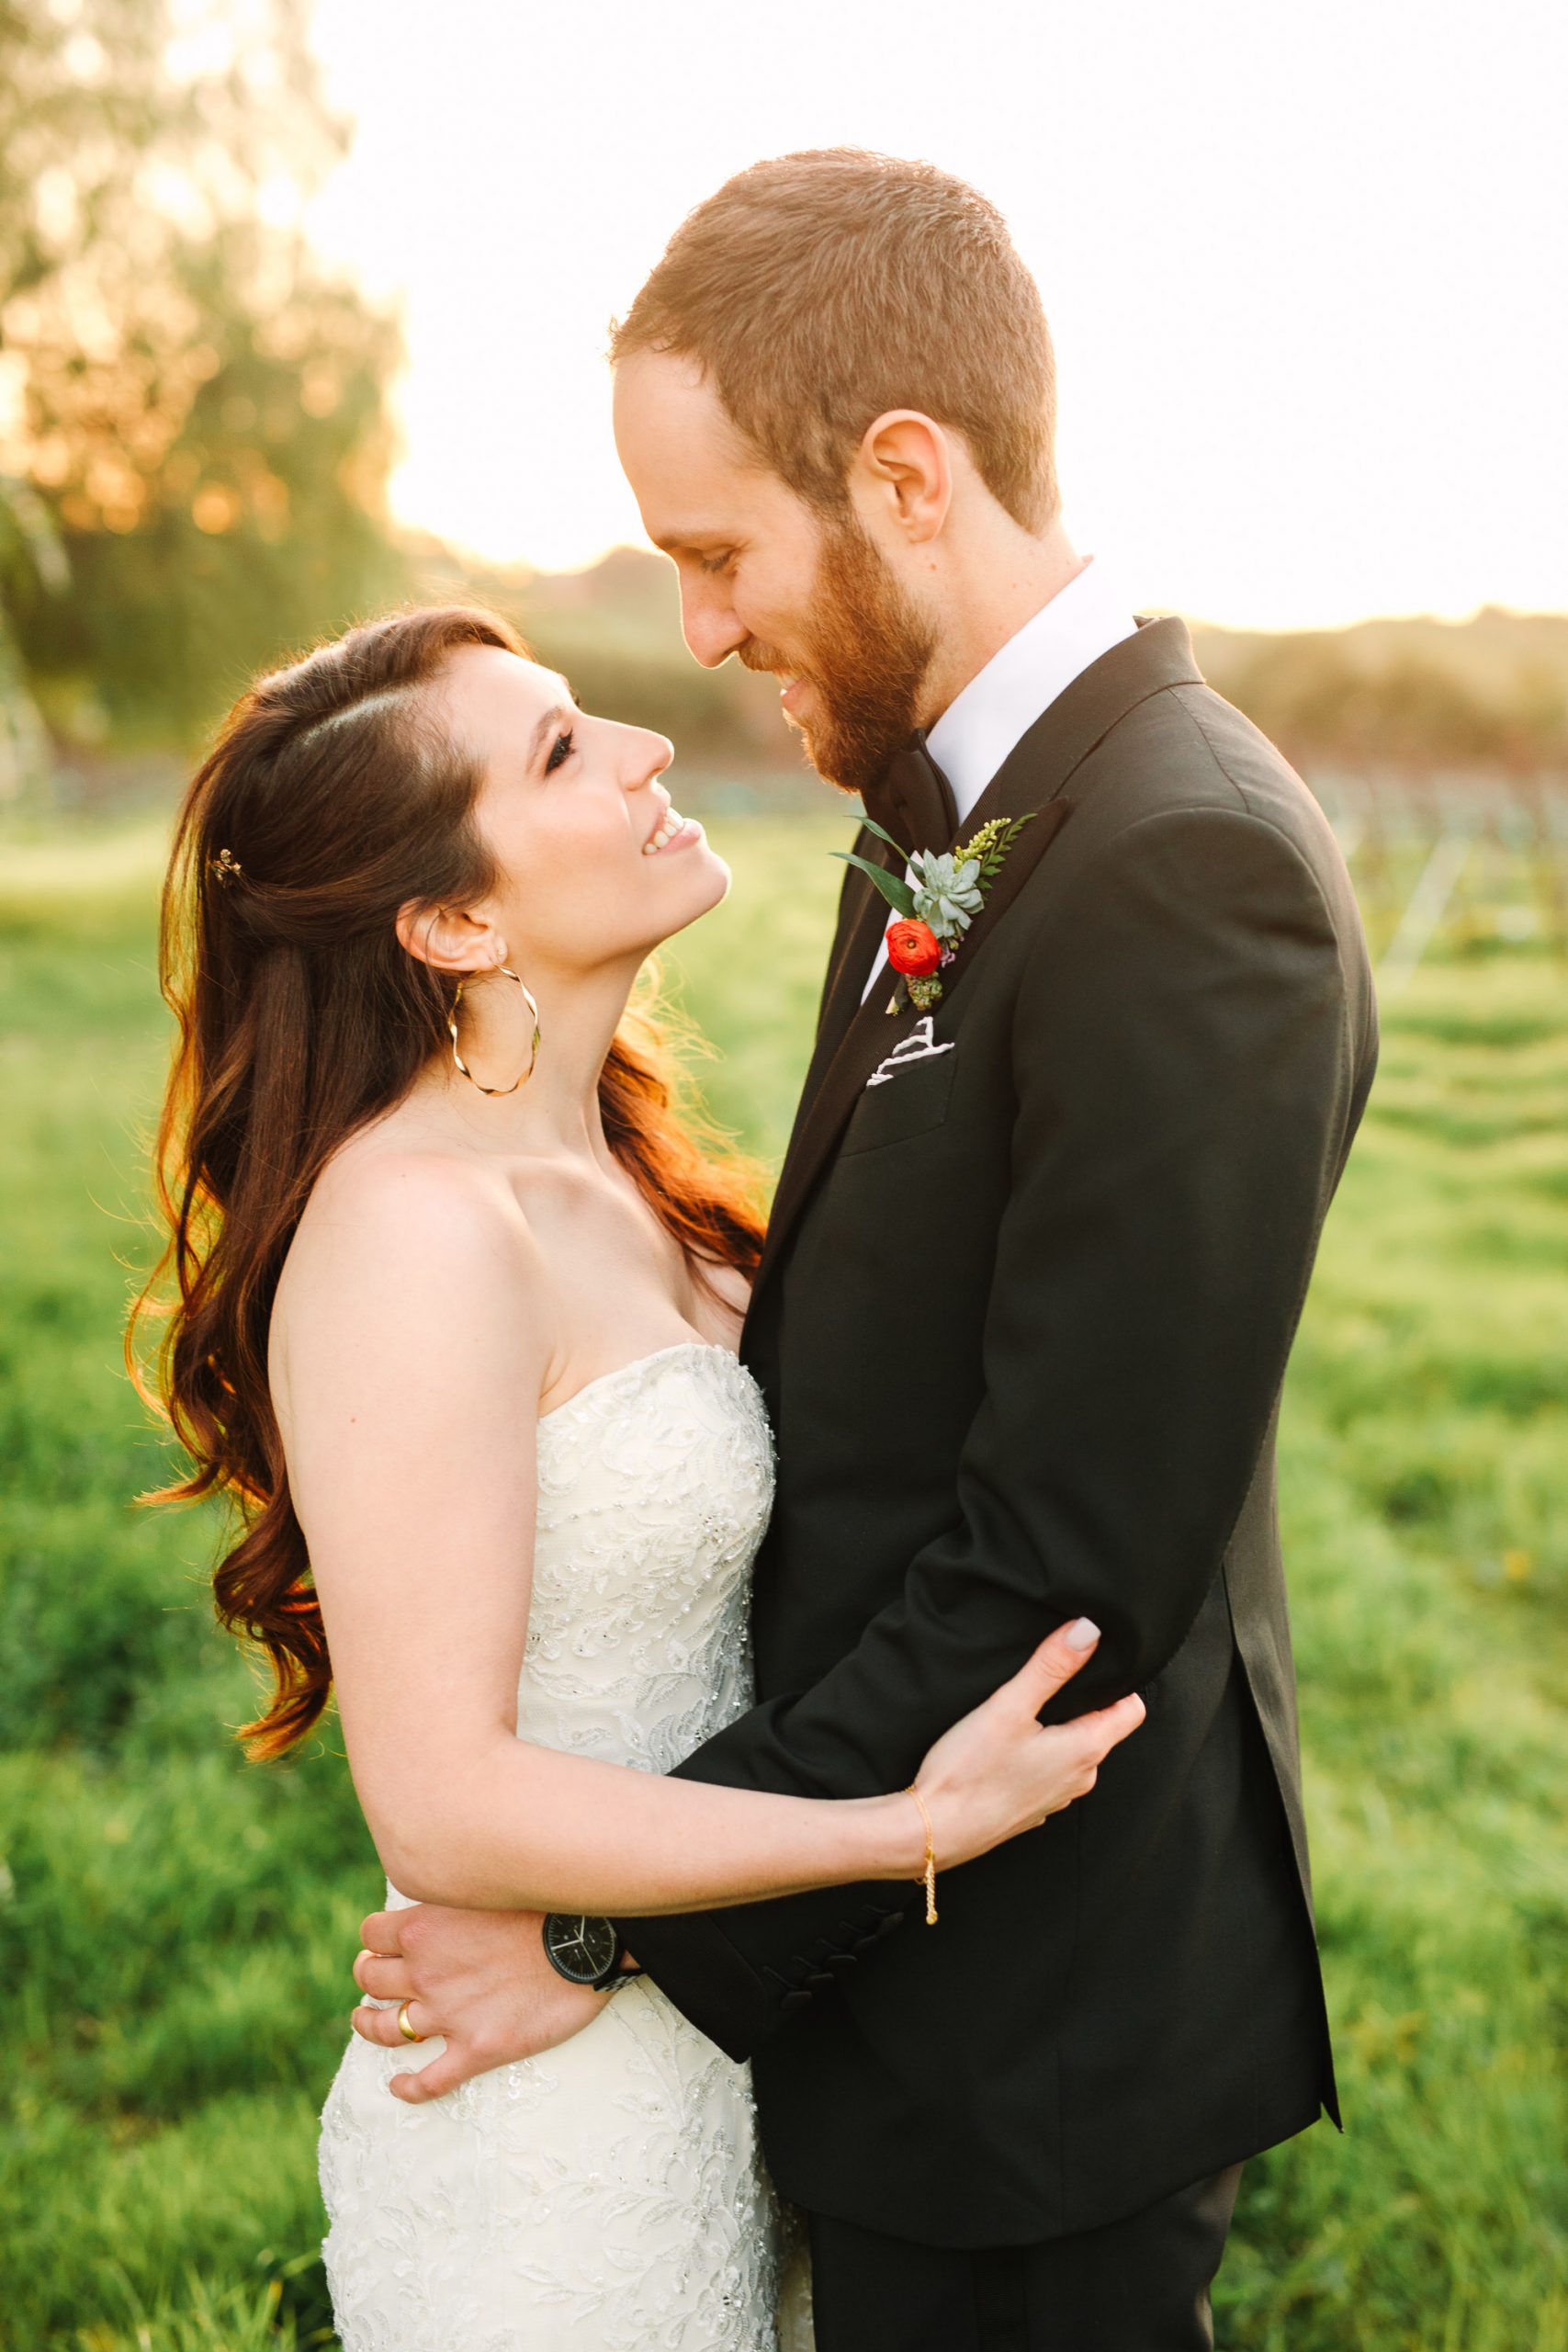 Golden hour wedding portrait by Mary Costa Photography